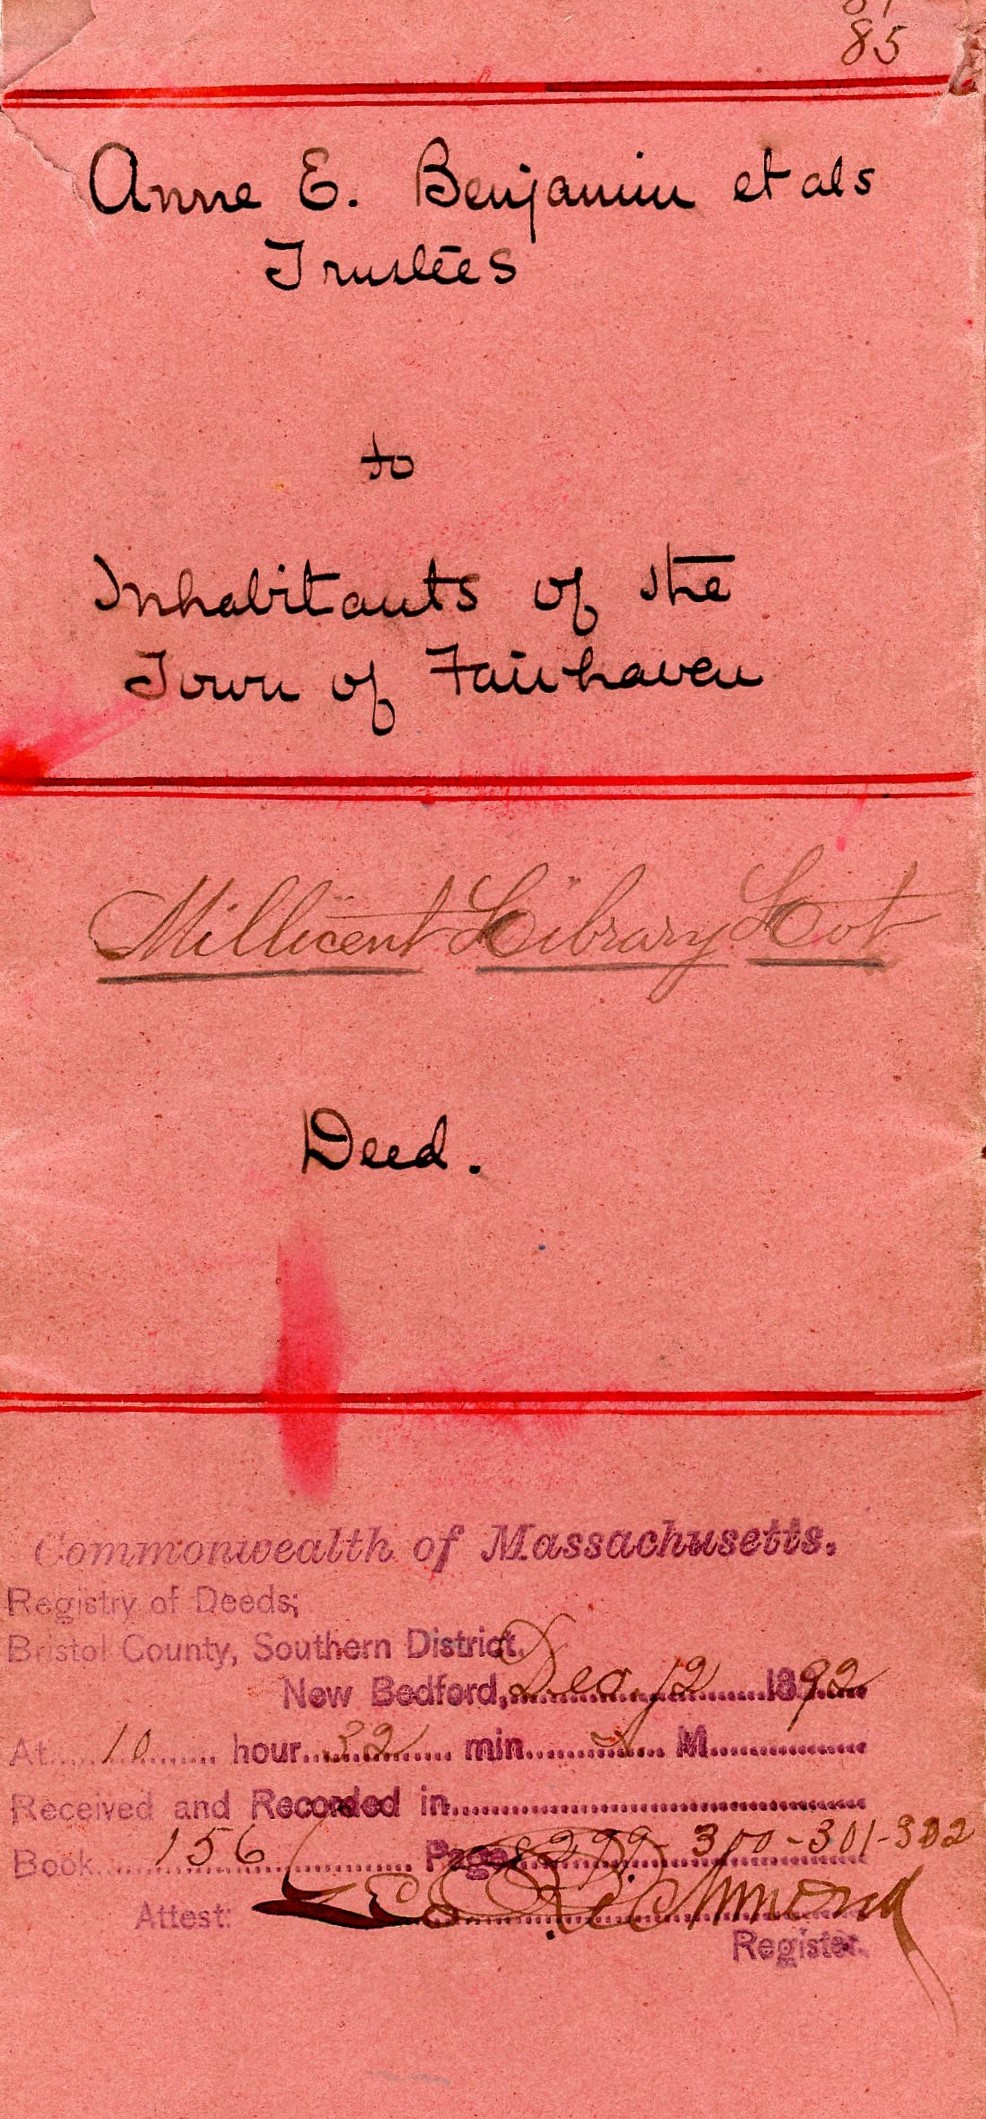 Cover for deed of the library, 1892